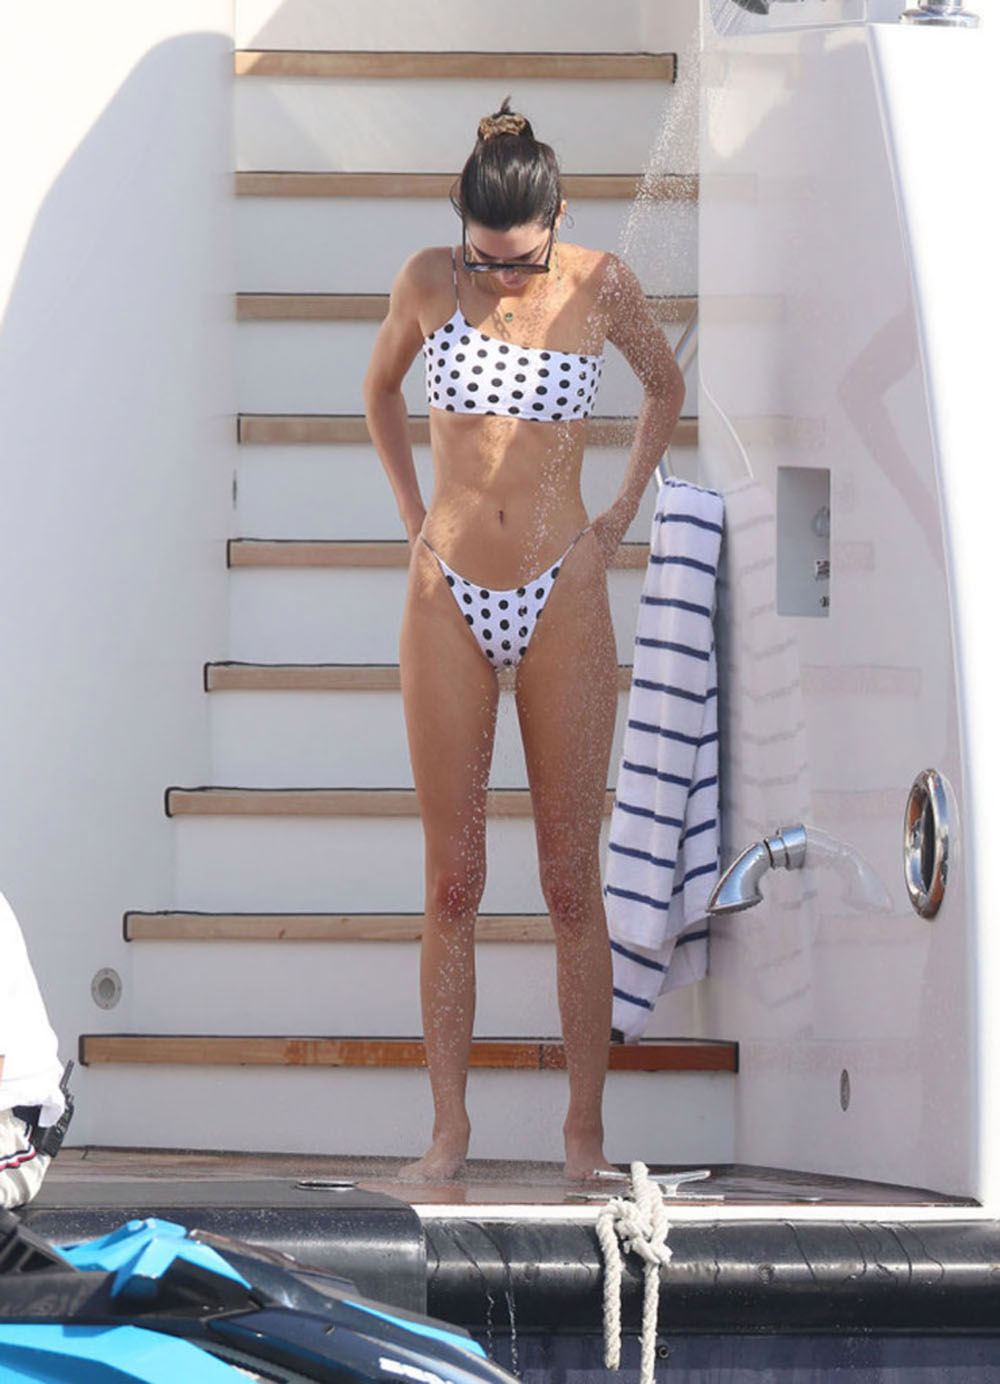 Kendall Jenner rocks a one-shouldered bikini while hanging on a boat in Monaco, France. She showered off on the ship after going on a jet ski ride.